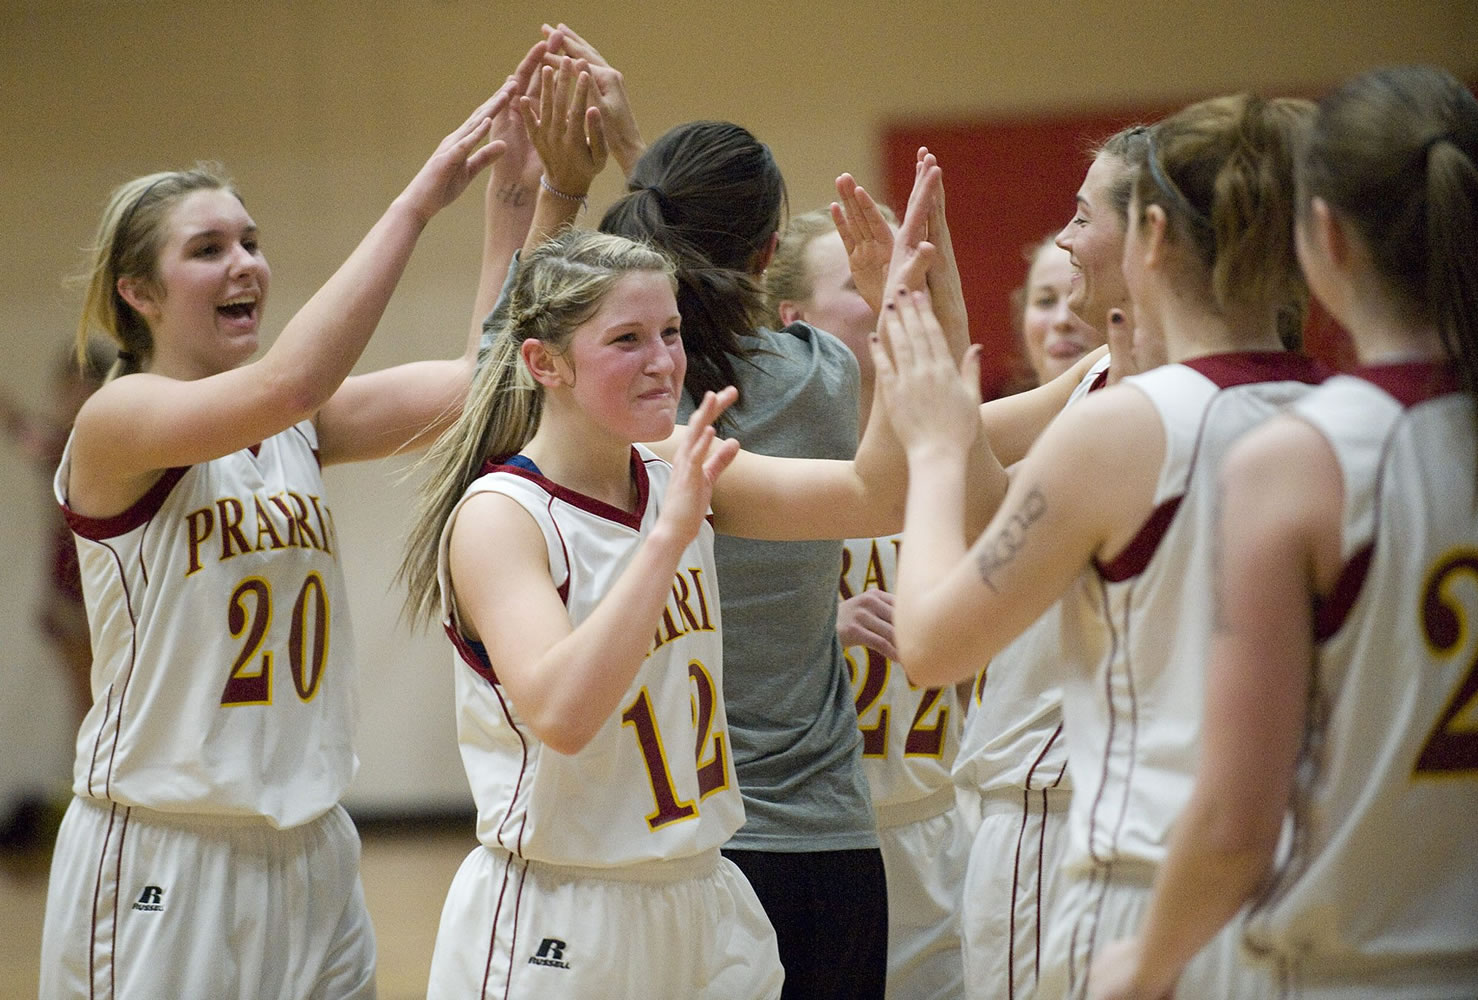 Prairie celebrates after beating Camas to win the championship at the  GSHL 3A Basketball Tournament at Fort Vancouver High School, Friday, February 10, 2012.